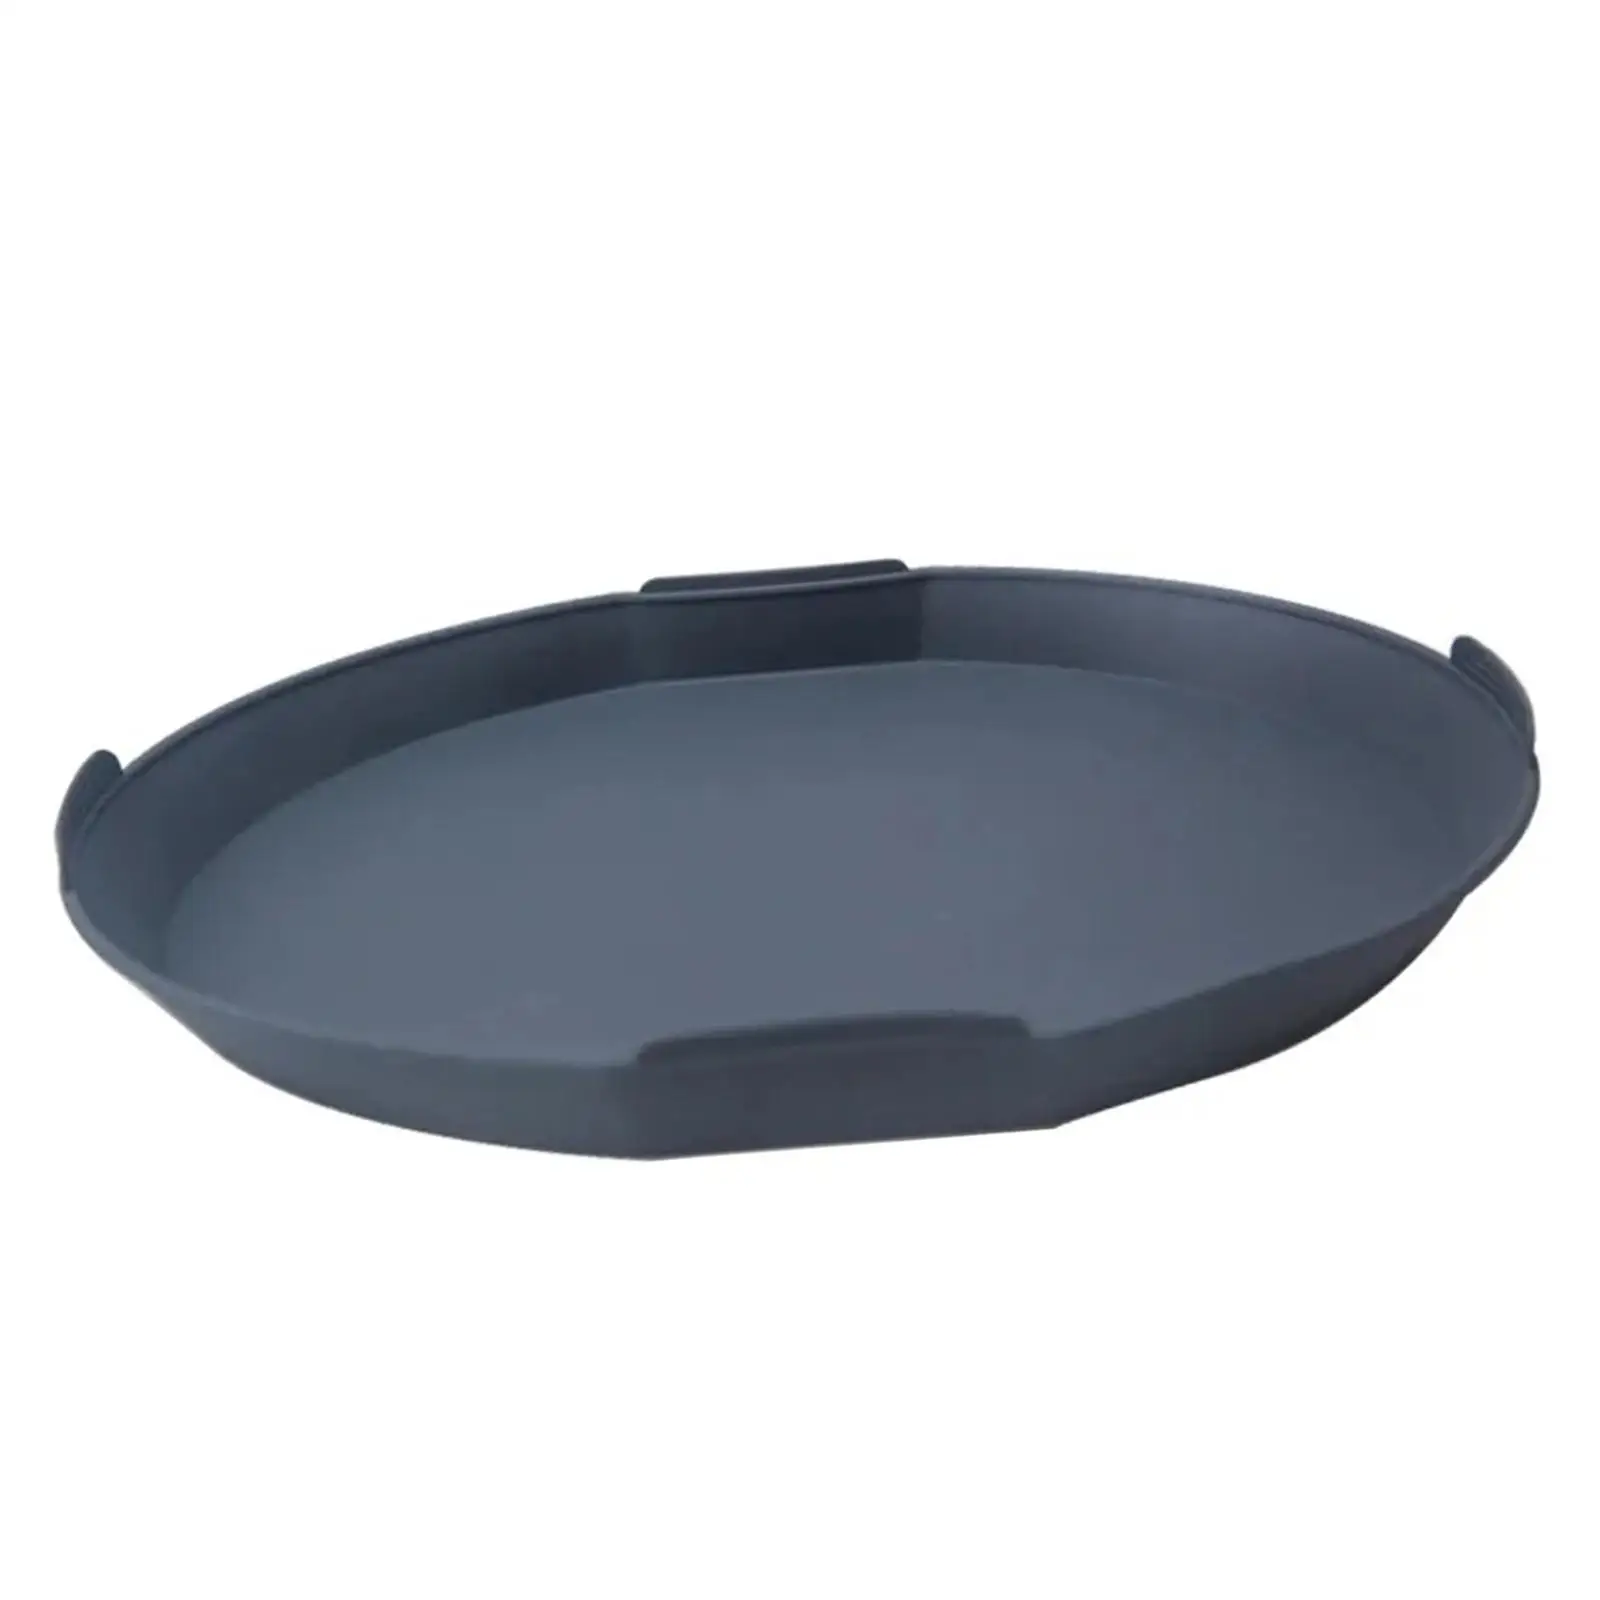 Grilling Pan Silicone Frying Nonstick Kitchen Accessory Barbecue Plate Electric Hot Plates for Steam Pot TM6 Fishing Beach